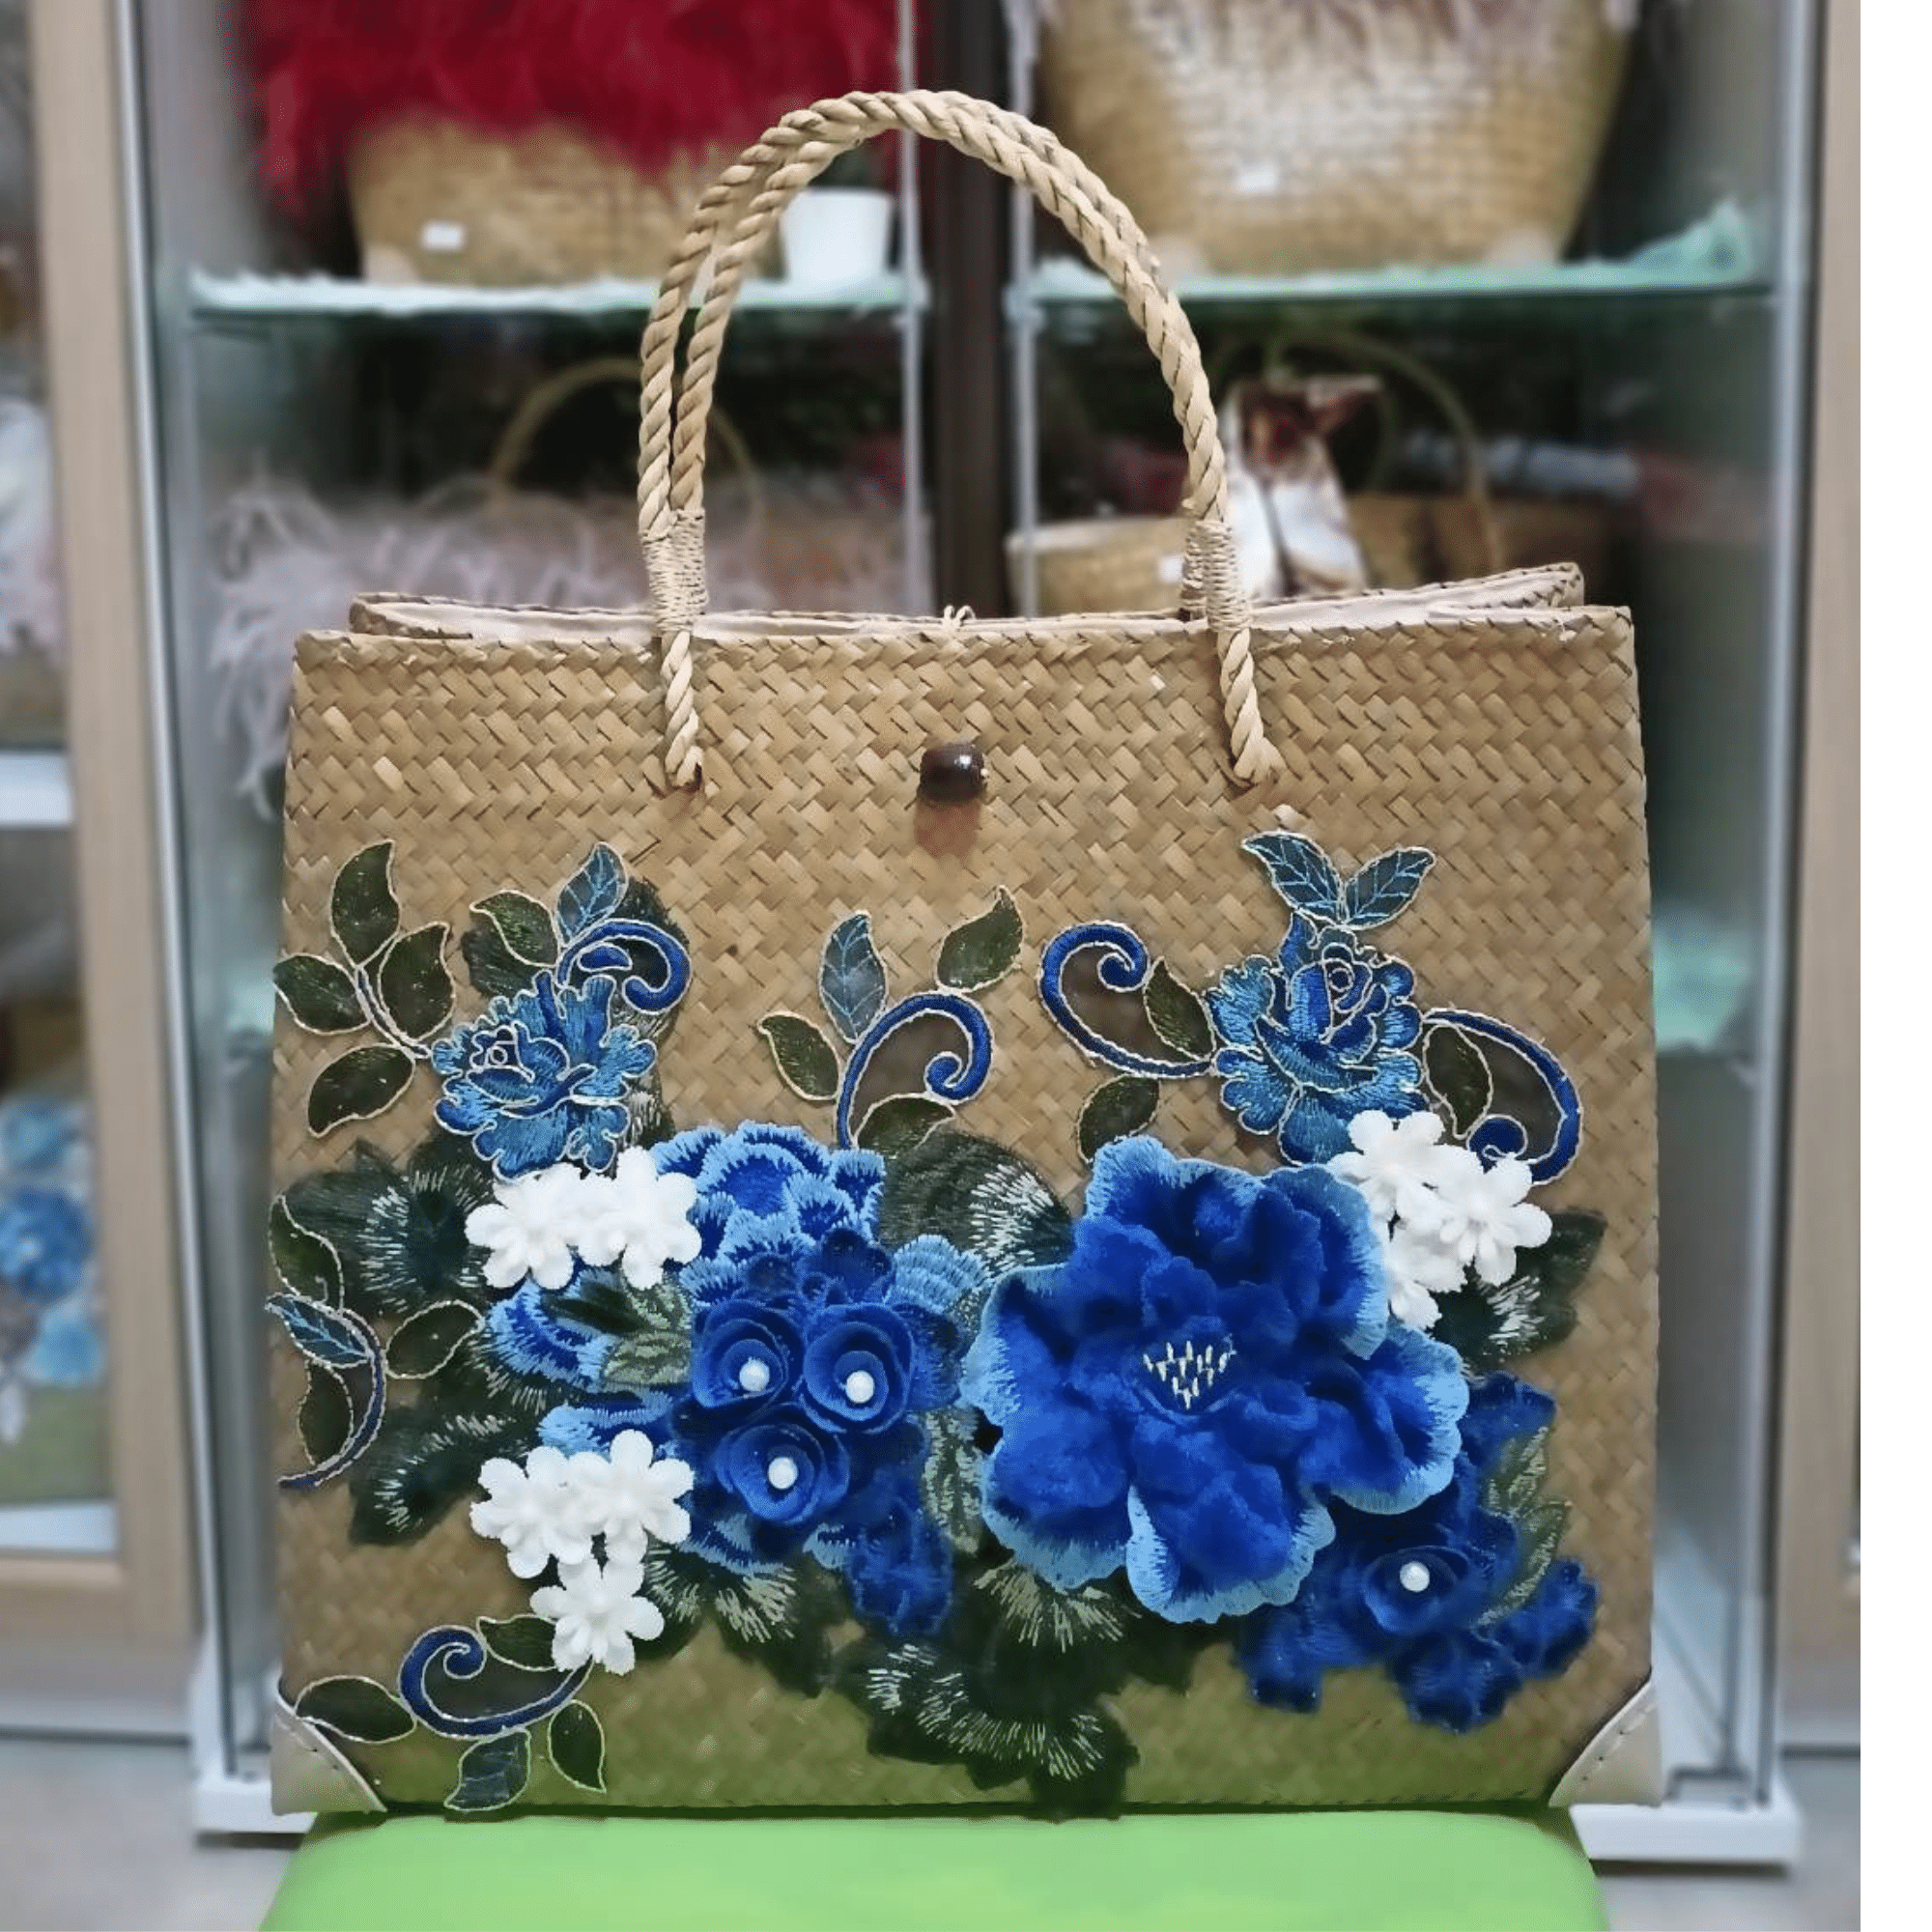 Elegant straw bag for mom on mothers day